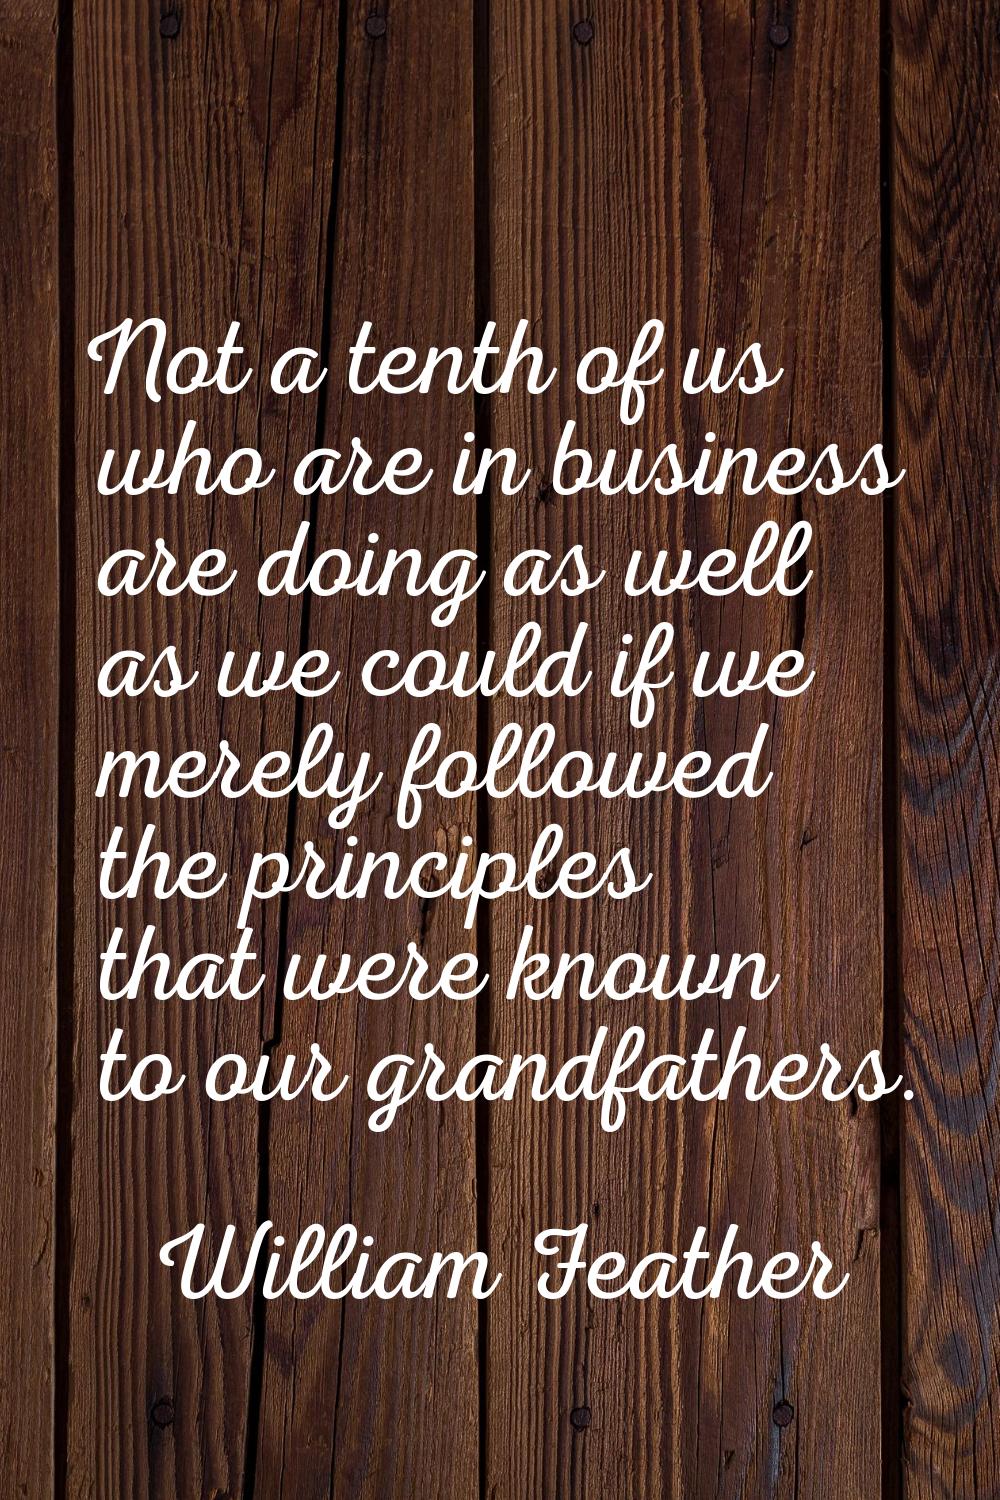 Not a tenth of us who are in business are doing as well as we could if we merely followed the princ